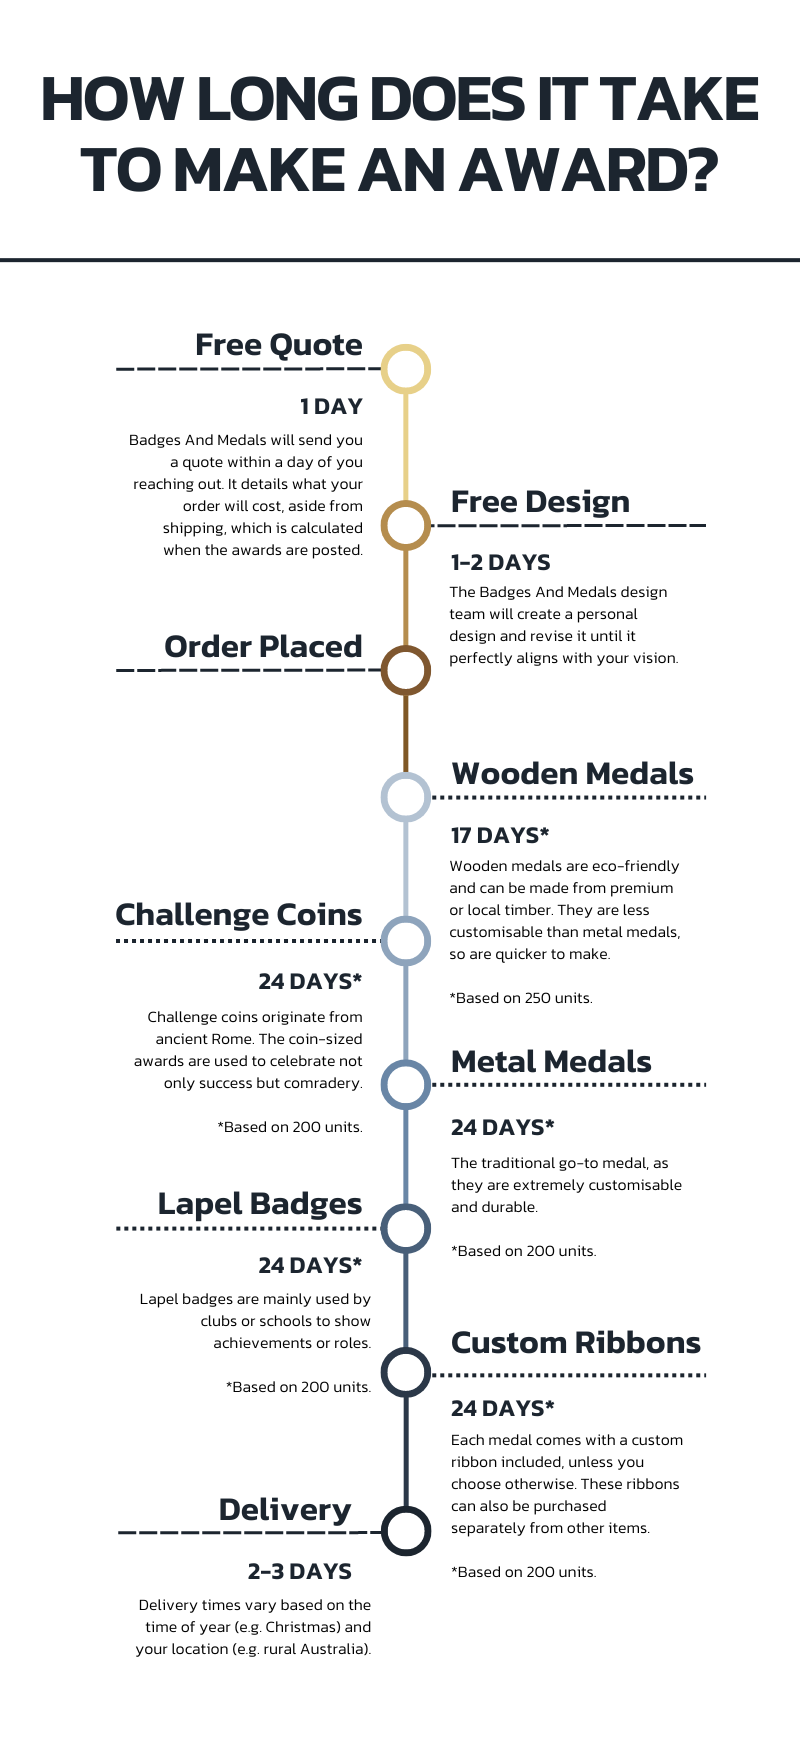 A diagram showing how long it takes to order custom awards from Badges And Medals.